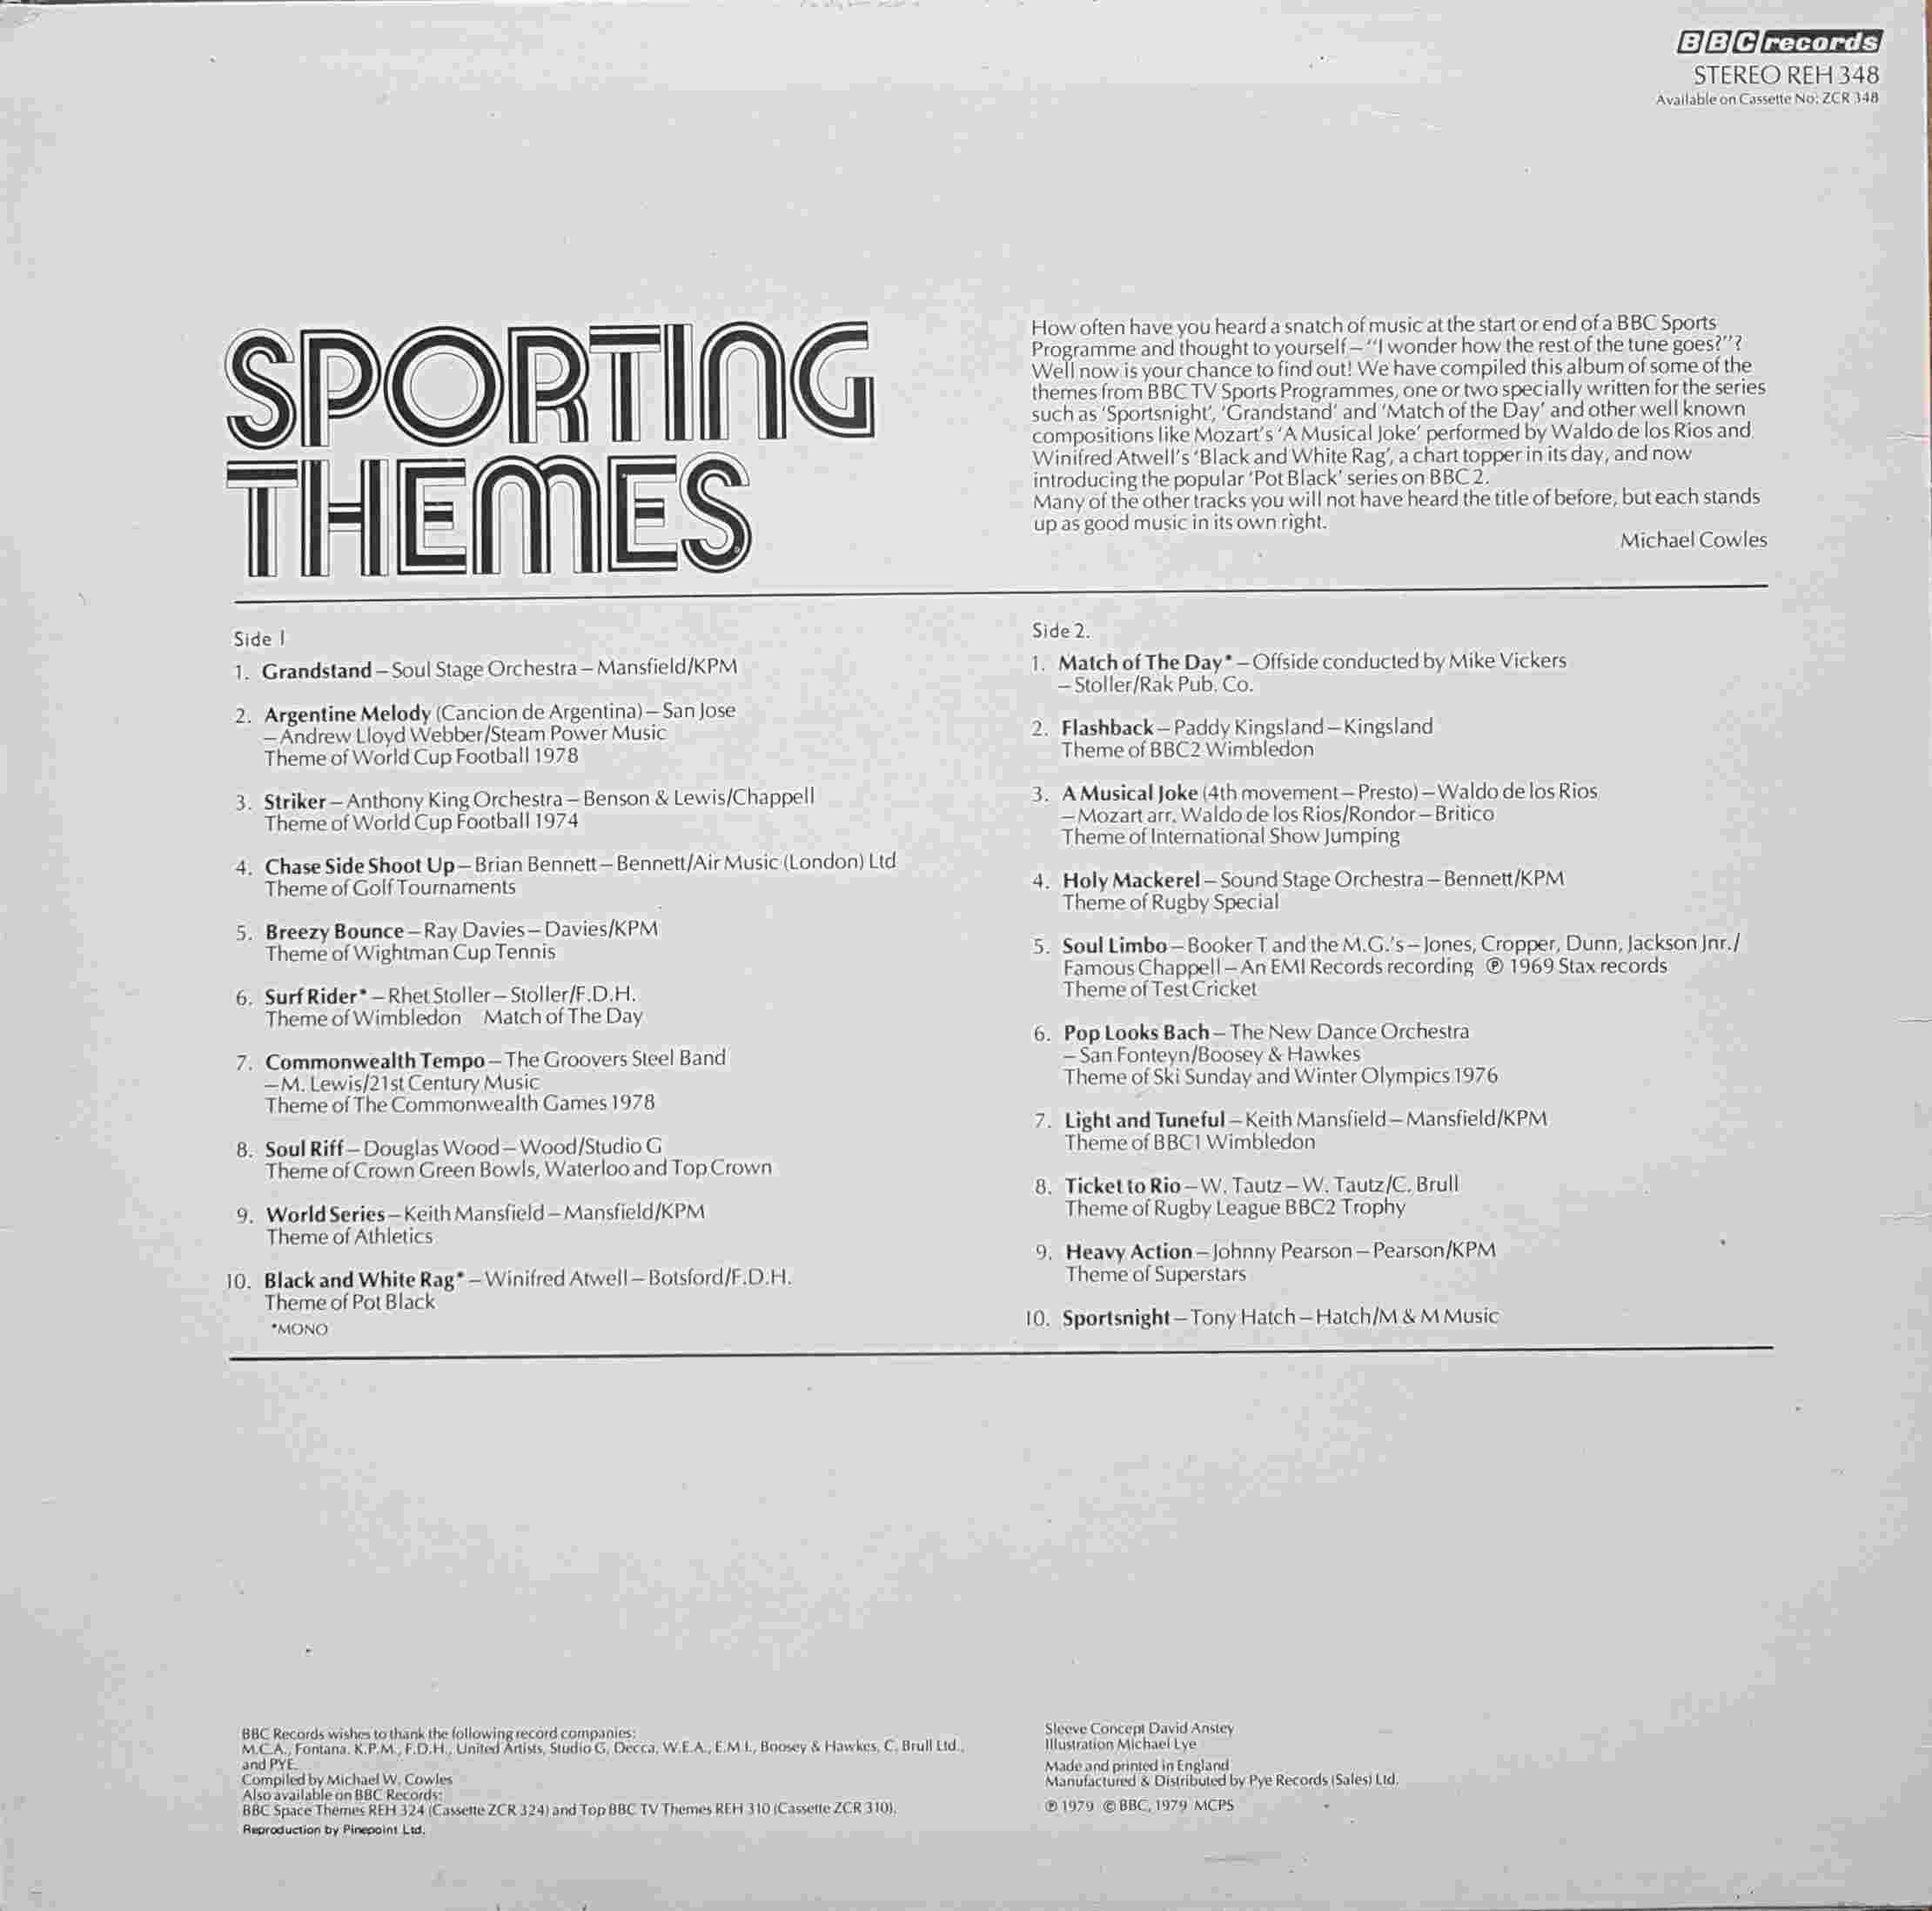 Picture of REH 348 BBC sporting themes by artist Various from the BBC records and Tapes library